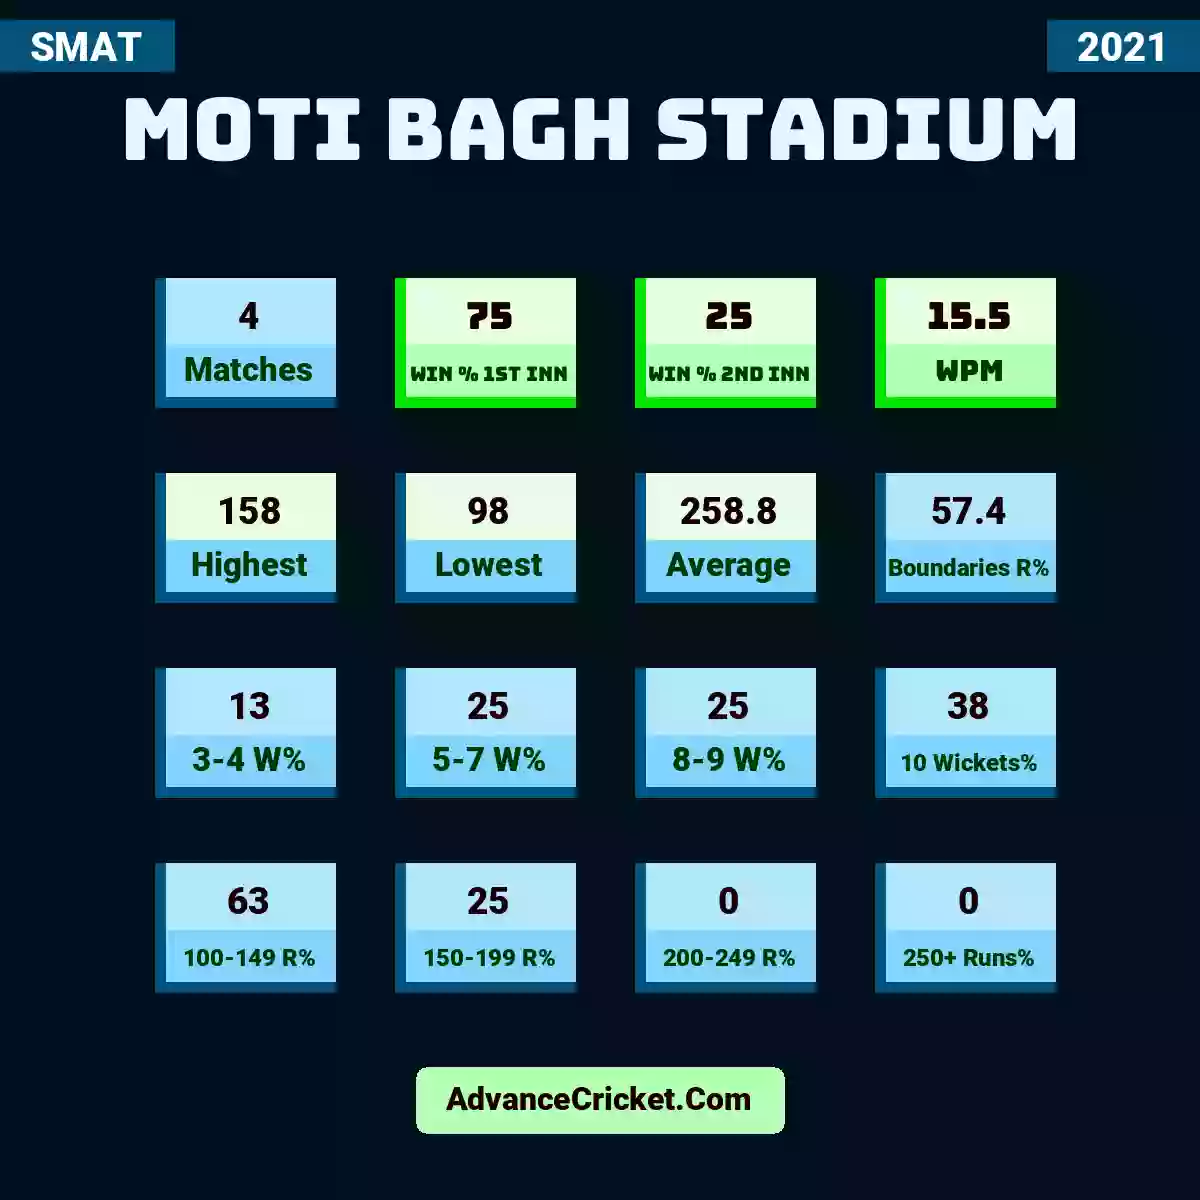 Image showing Moti Bagh Stadium with Matches: 4, Win % 1st Inn: 75, Win % 2nd Inn: 25, WPM: 15.5, Highest: 158, Lowest: 98, Average: 258.8, Boundaries R%: 57.4, 3-4 W%: 13, 5-7 W%: 25, 8-9 W%: 25, 10 Wickets%: 38, 100-149 R%: 63, 150-199 R%: 25, 200-249 R%: 0, 250+ Runs%: 0.